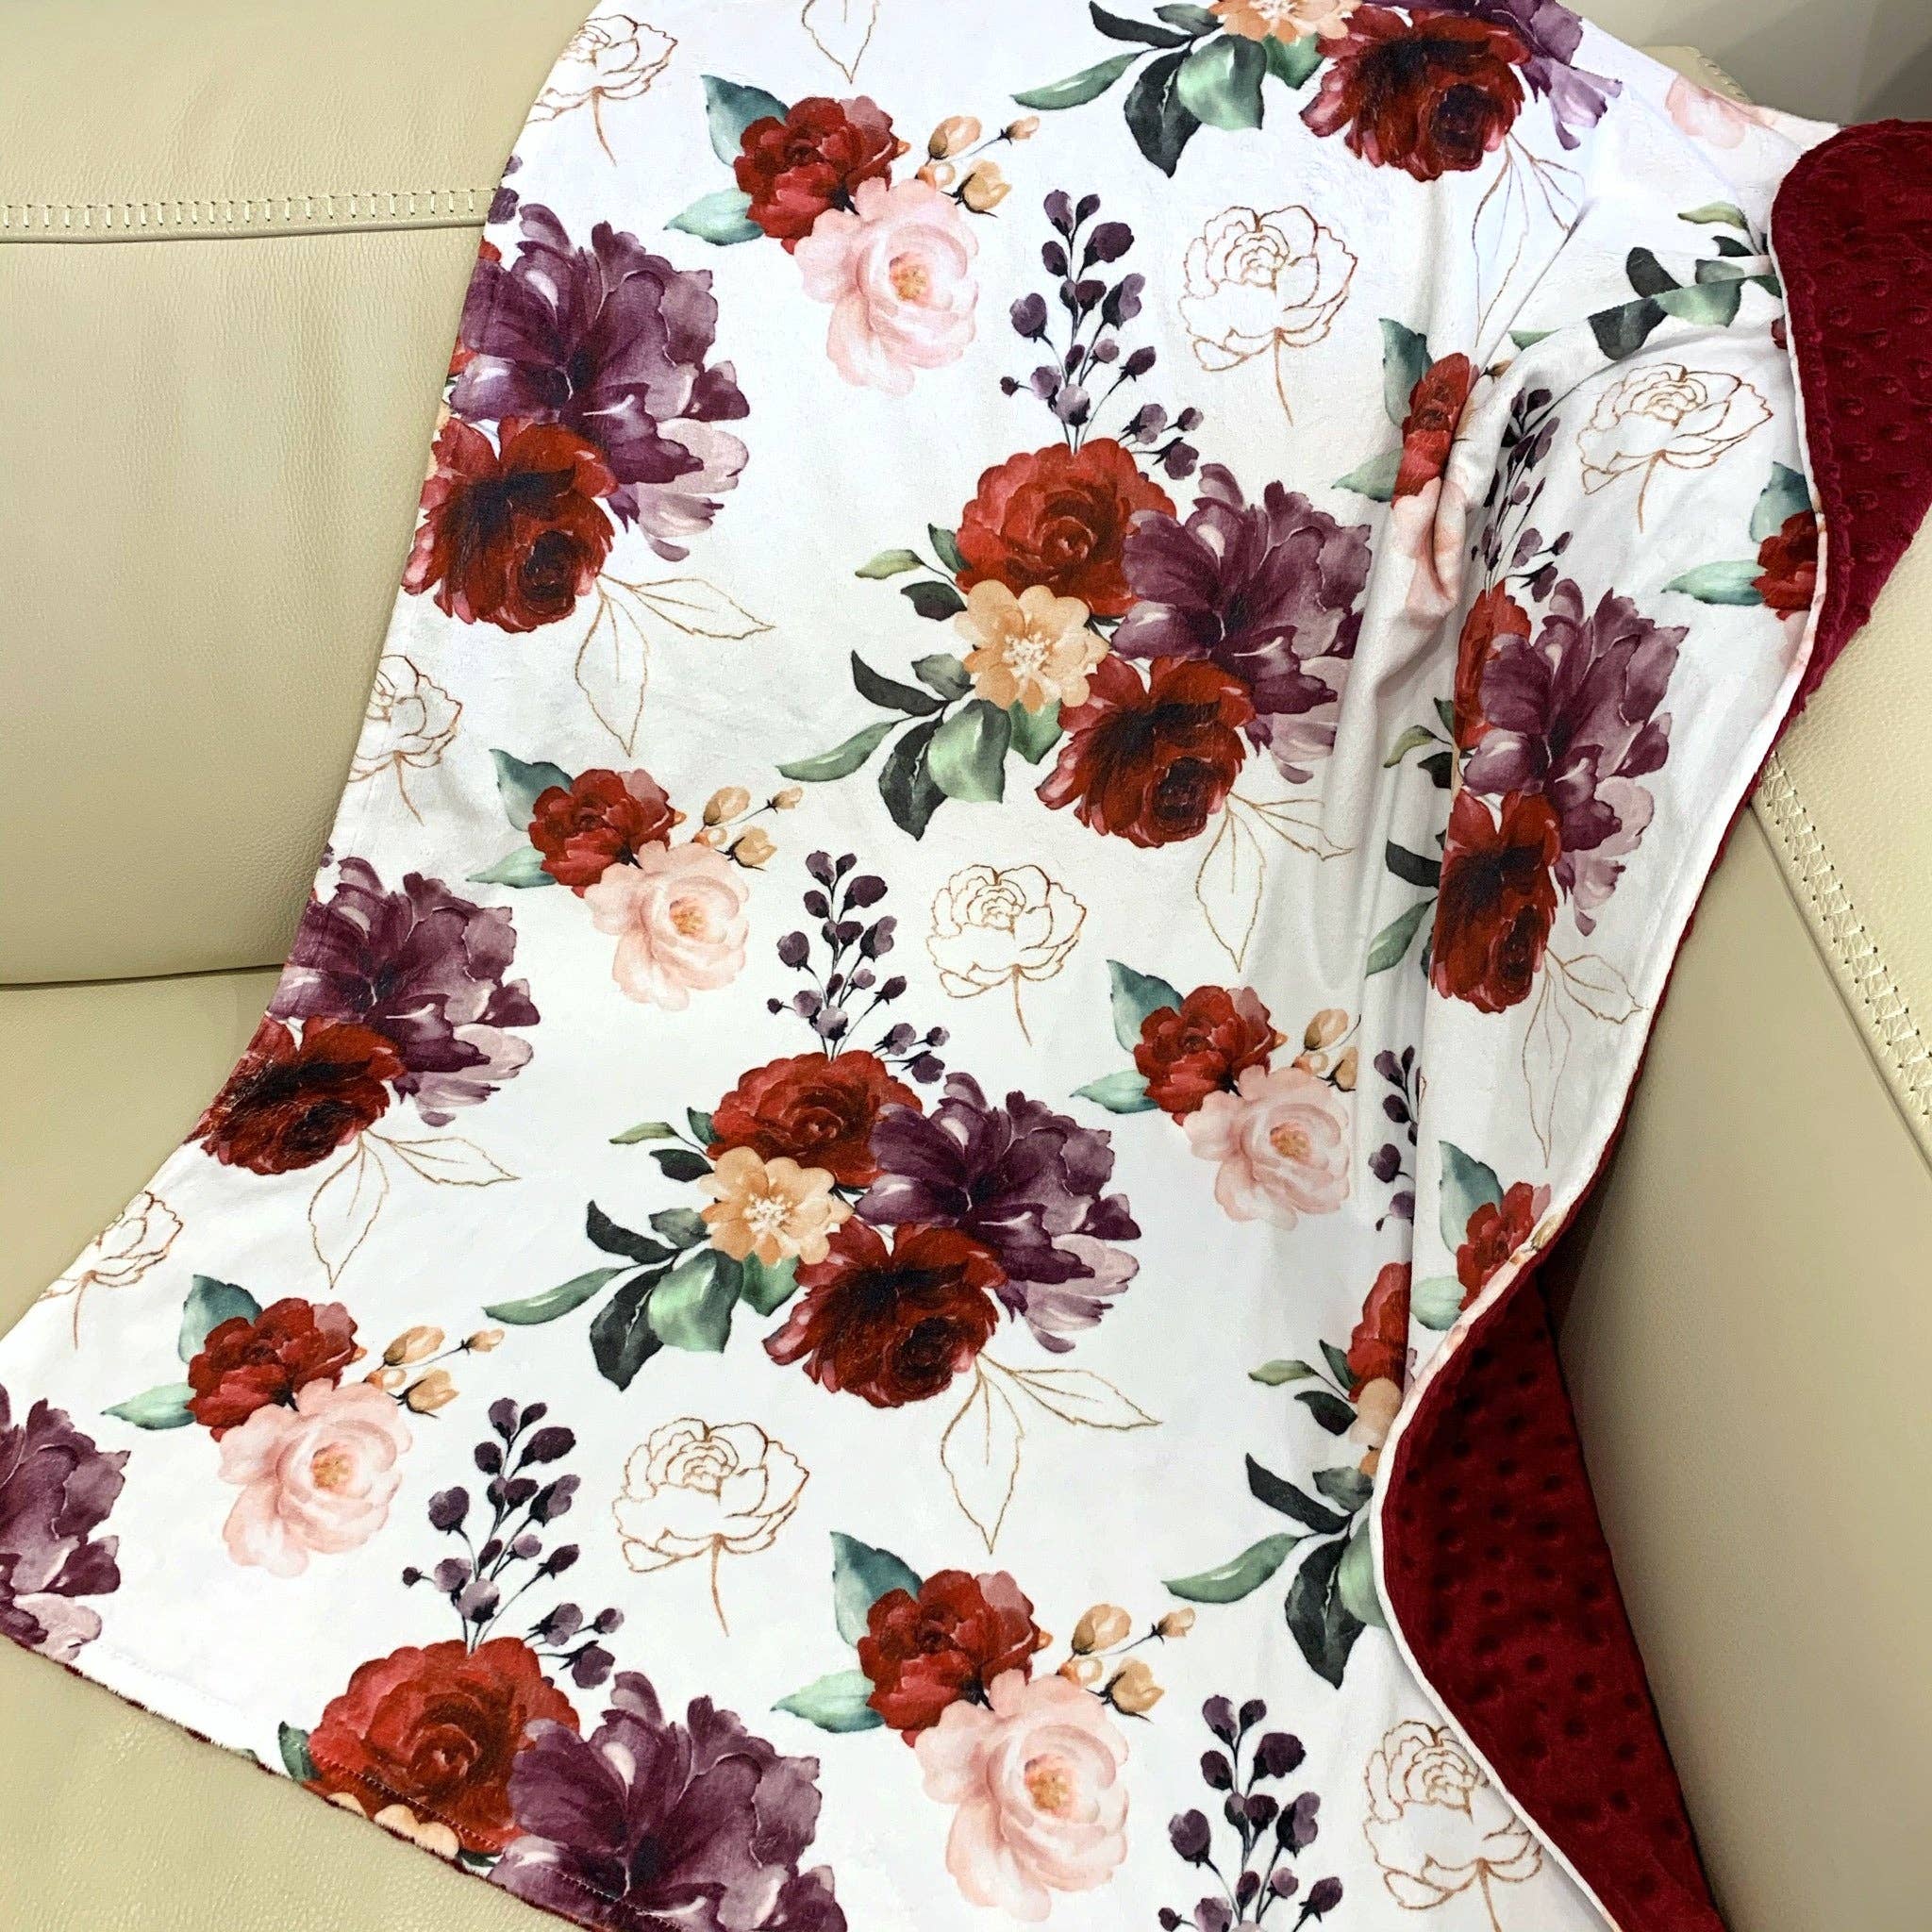 50x60 Adult Throw Minky Blanket - Red Floral